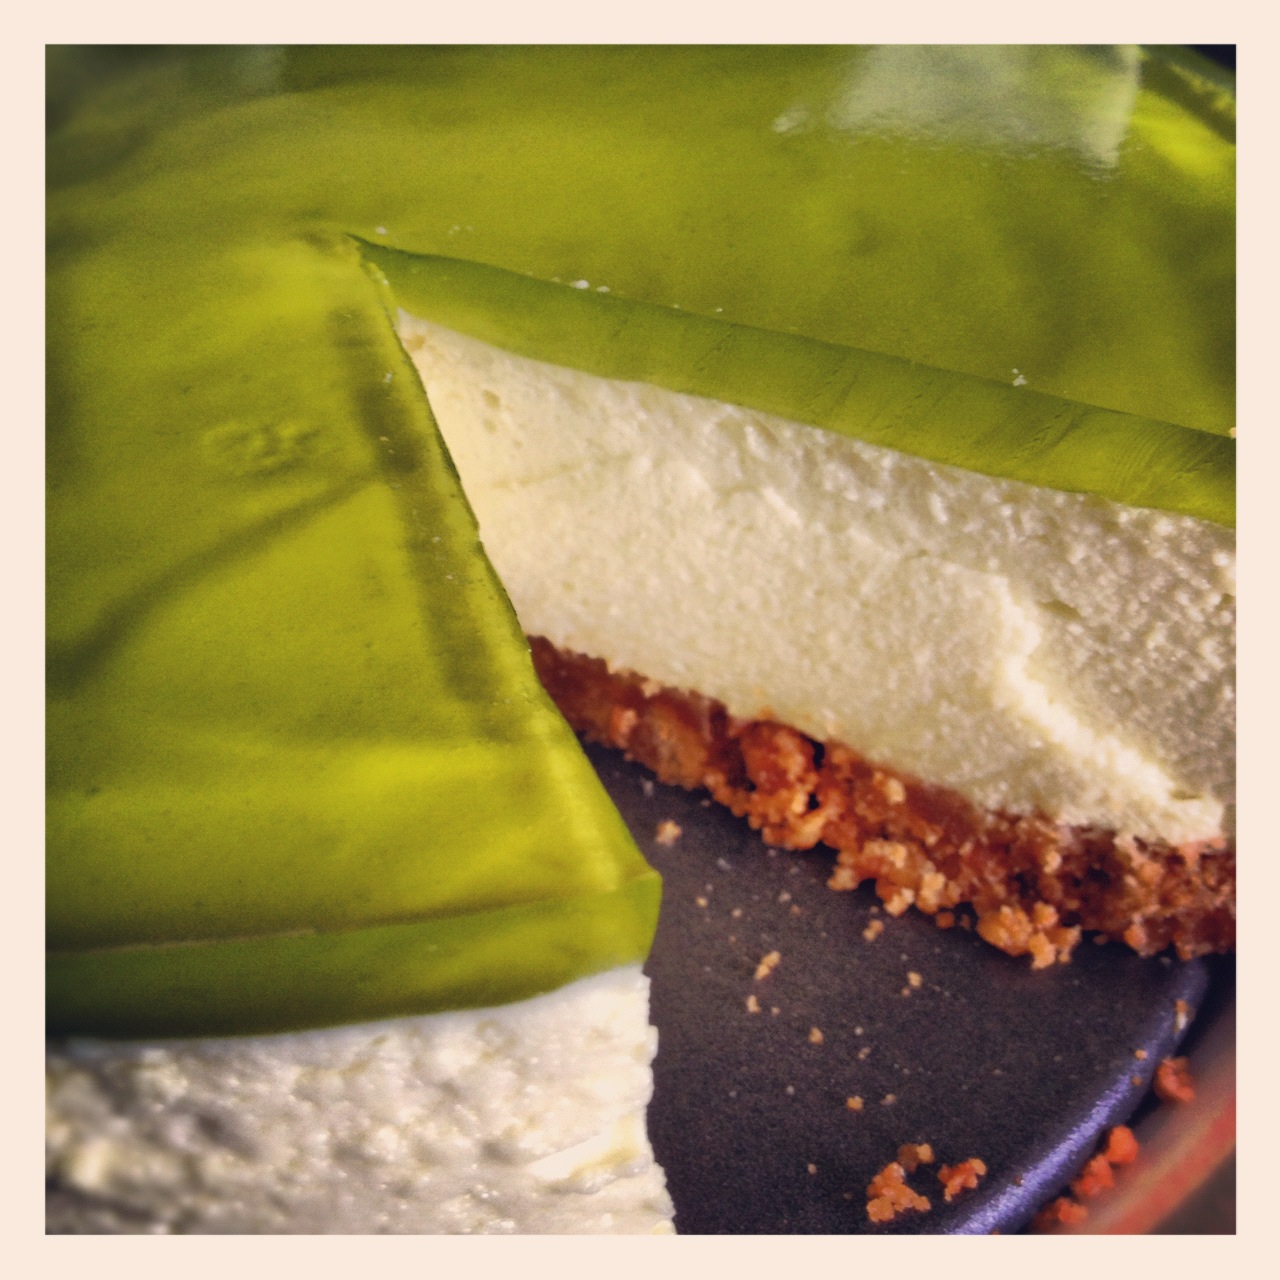 Jo's Lime Cheesecake